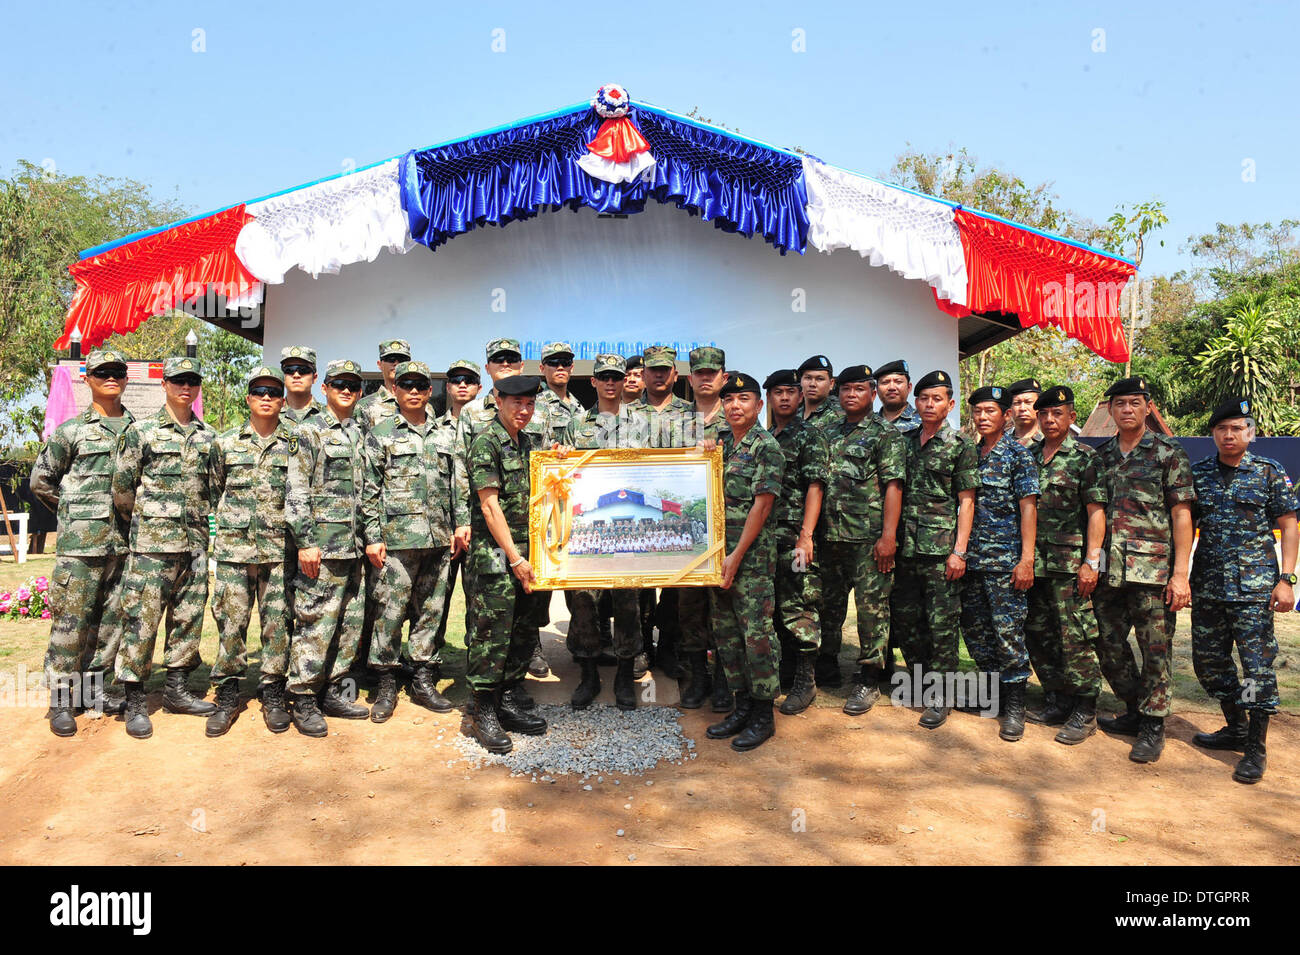 (140218) -- PITSANULOKE, Feb. 18, 2014 (Xinhua) -- Chinese and Thai soldiers pose for a group photo during the exercise Cobra Gold 2014 at a school in Pitsanuloke Province, Thailand, Feb. 18, 2014. China has sent troops to attend the multilateral military exercise Cobra Gold, led by the United States and Thailand, for the first time. The seventeen-strong Chinese squad will take part in operations at the command and coordination center, engineering assistance, medical aid as well as discussions and exchanges of military medical sciences, according to officers with the foreign affairs office of Stock Photo